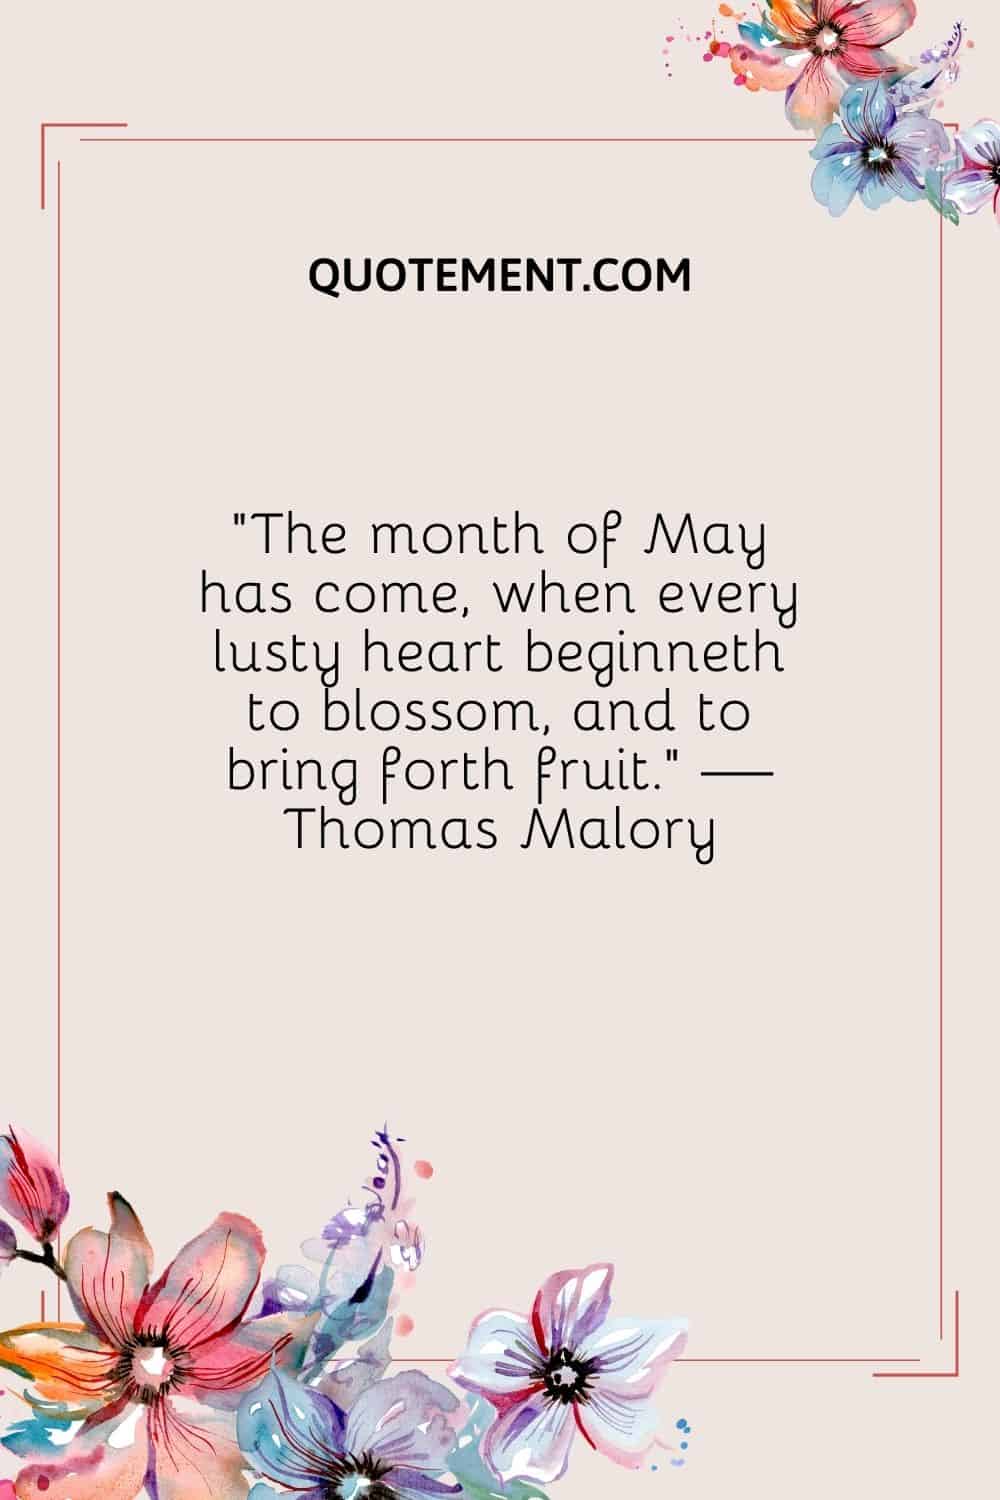 “The month of May has come, when every lusty heart beginneth to blossom, and to bring forth fruit.” — Thomas Malory